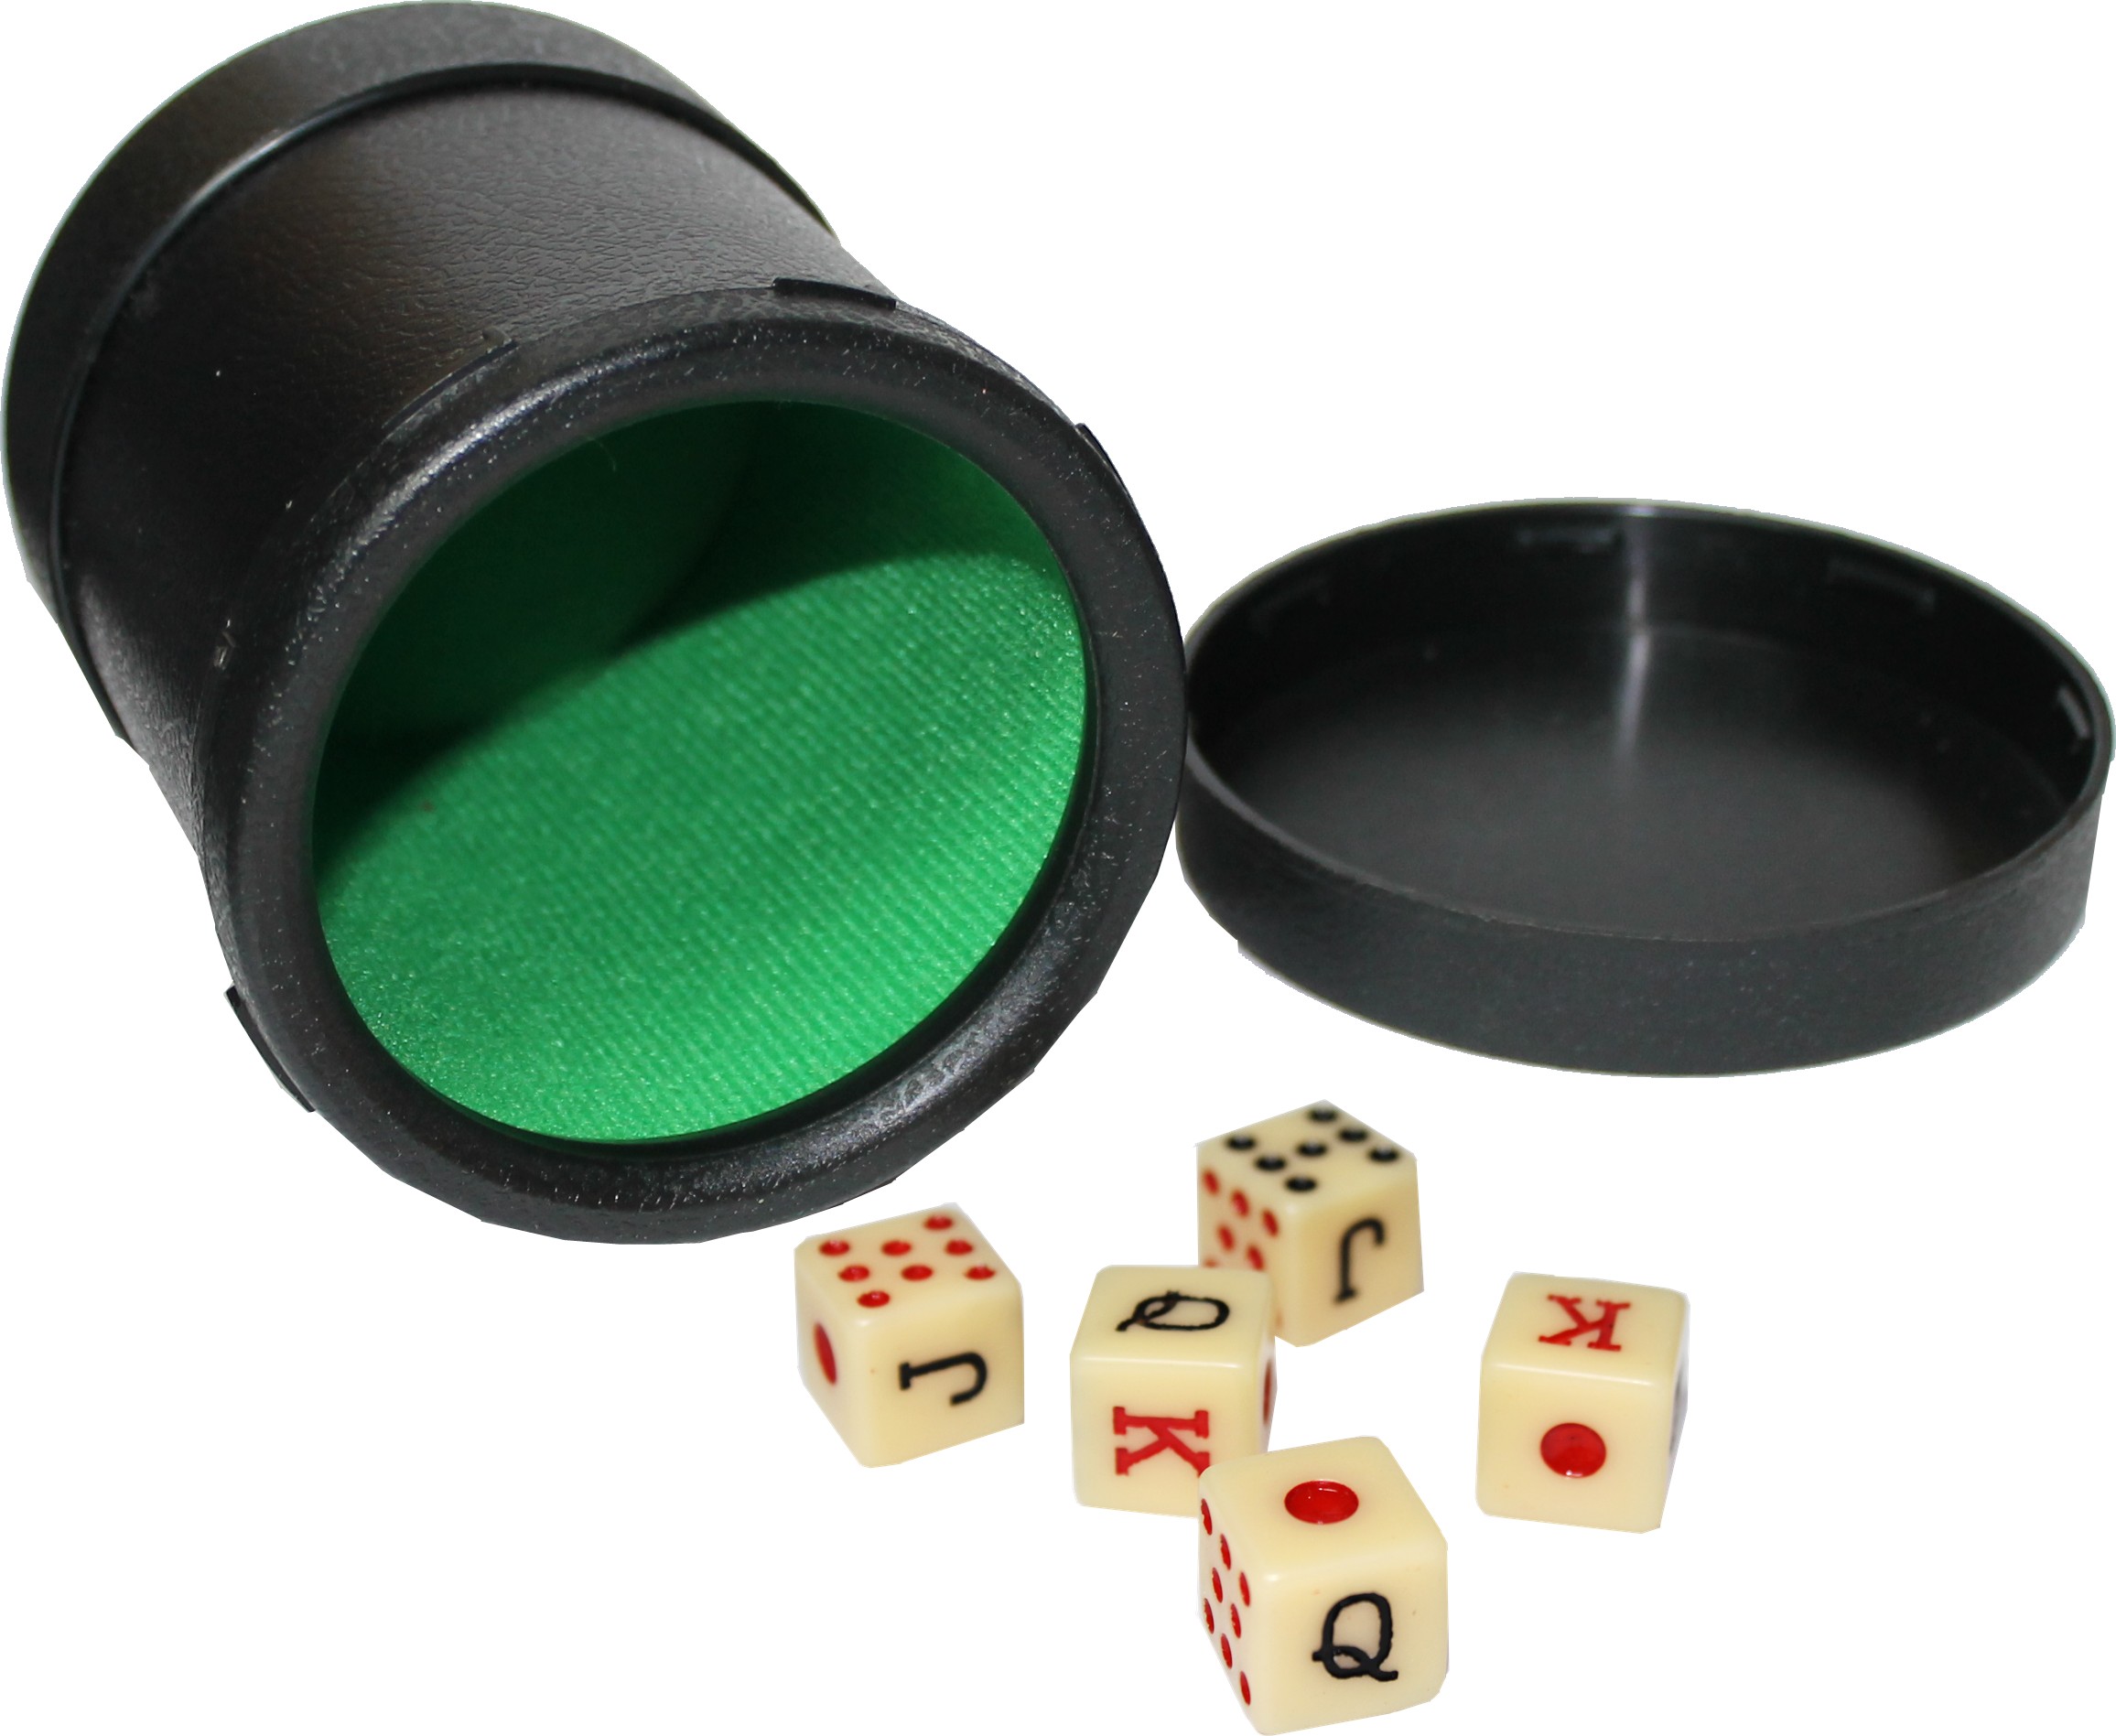 Cubilete Cup Faux Leather w/ Dice Set Storage cubiletes Game Chaises Play Home 